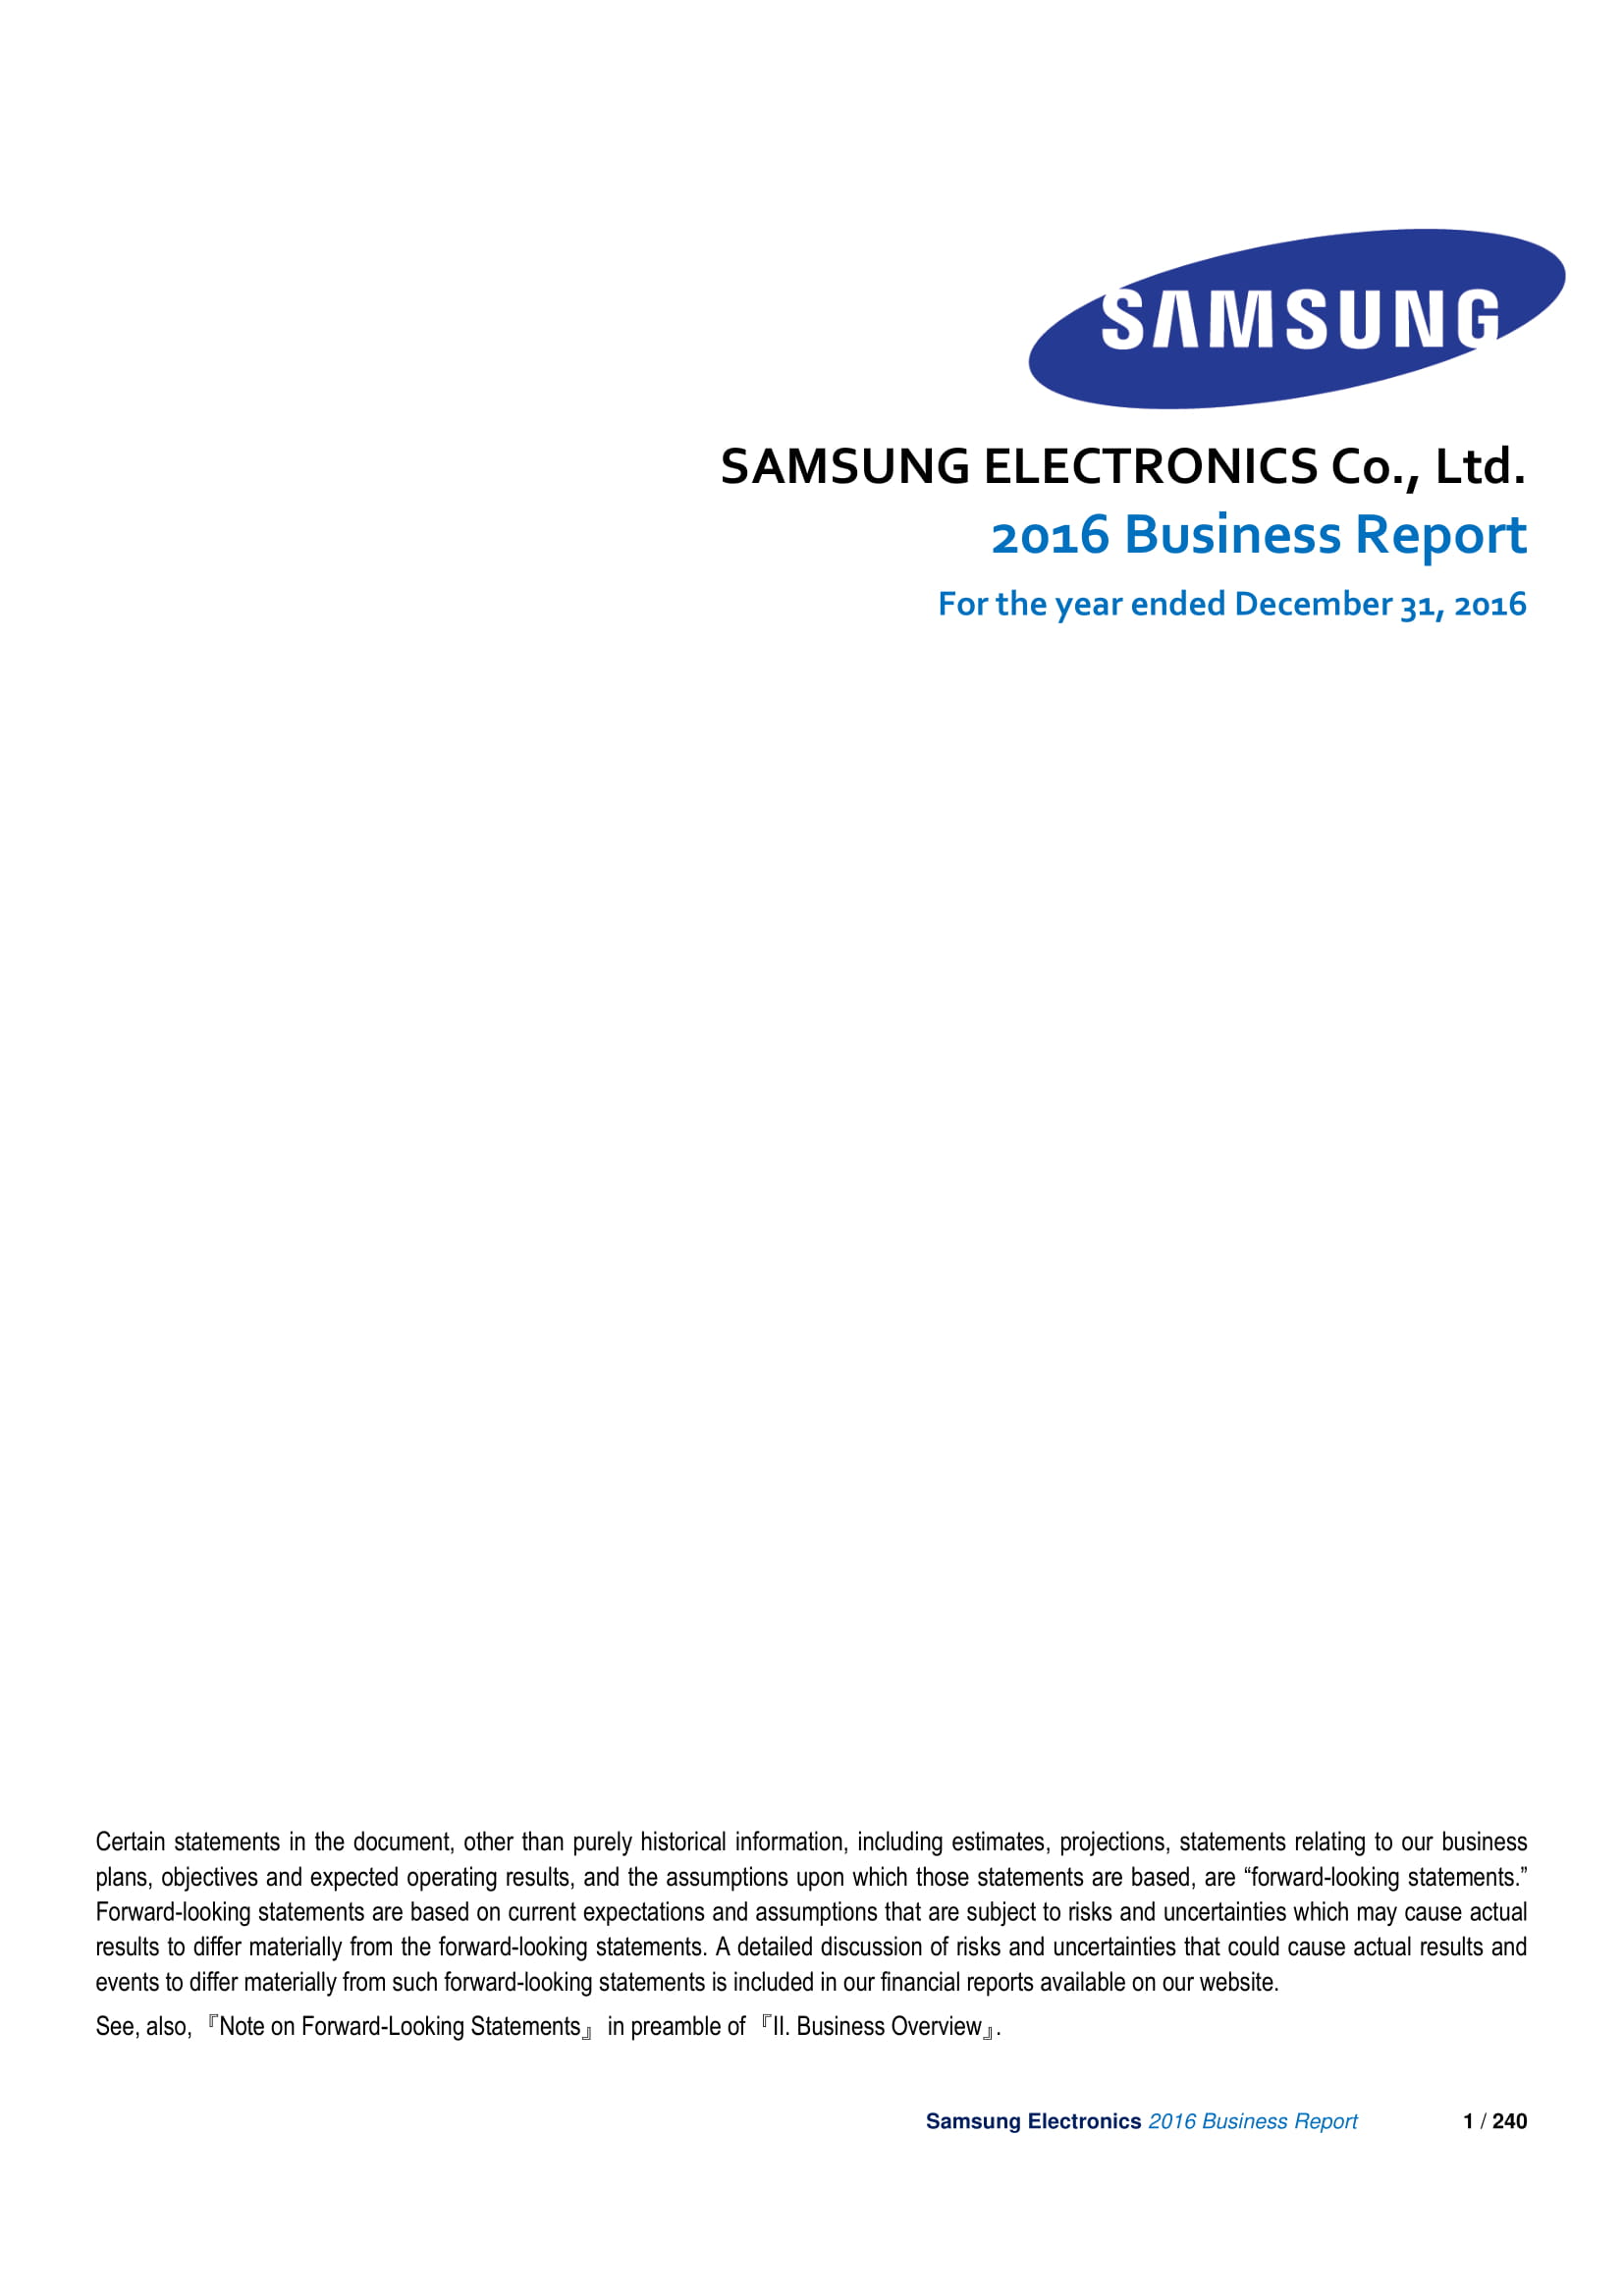 samsung electronics 2016 business report example